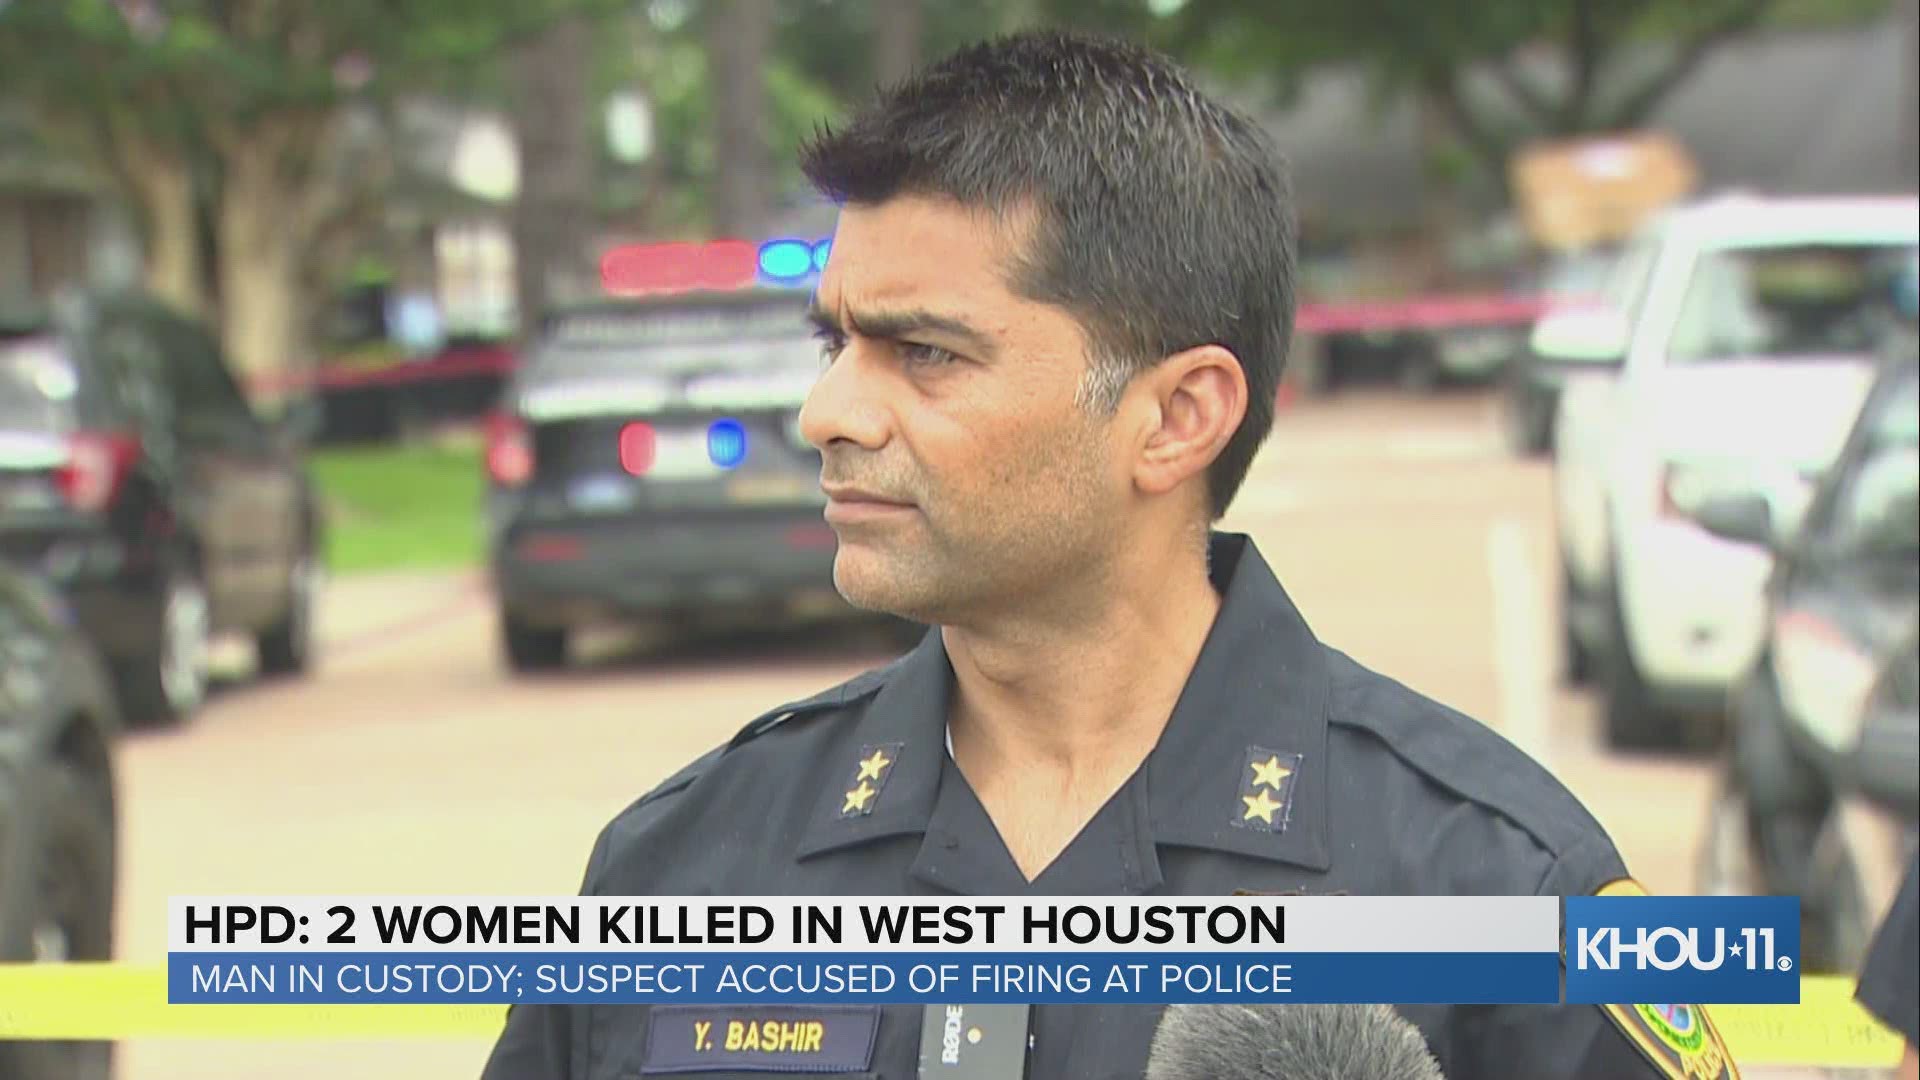 A man, accused of fatally shooting his girlfriend and her mother, is hospitalized with multiple gunshot wounds after HPD officers respond to home in west Houston.